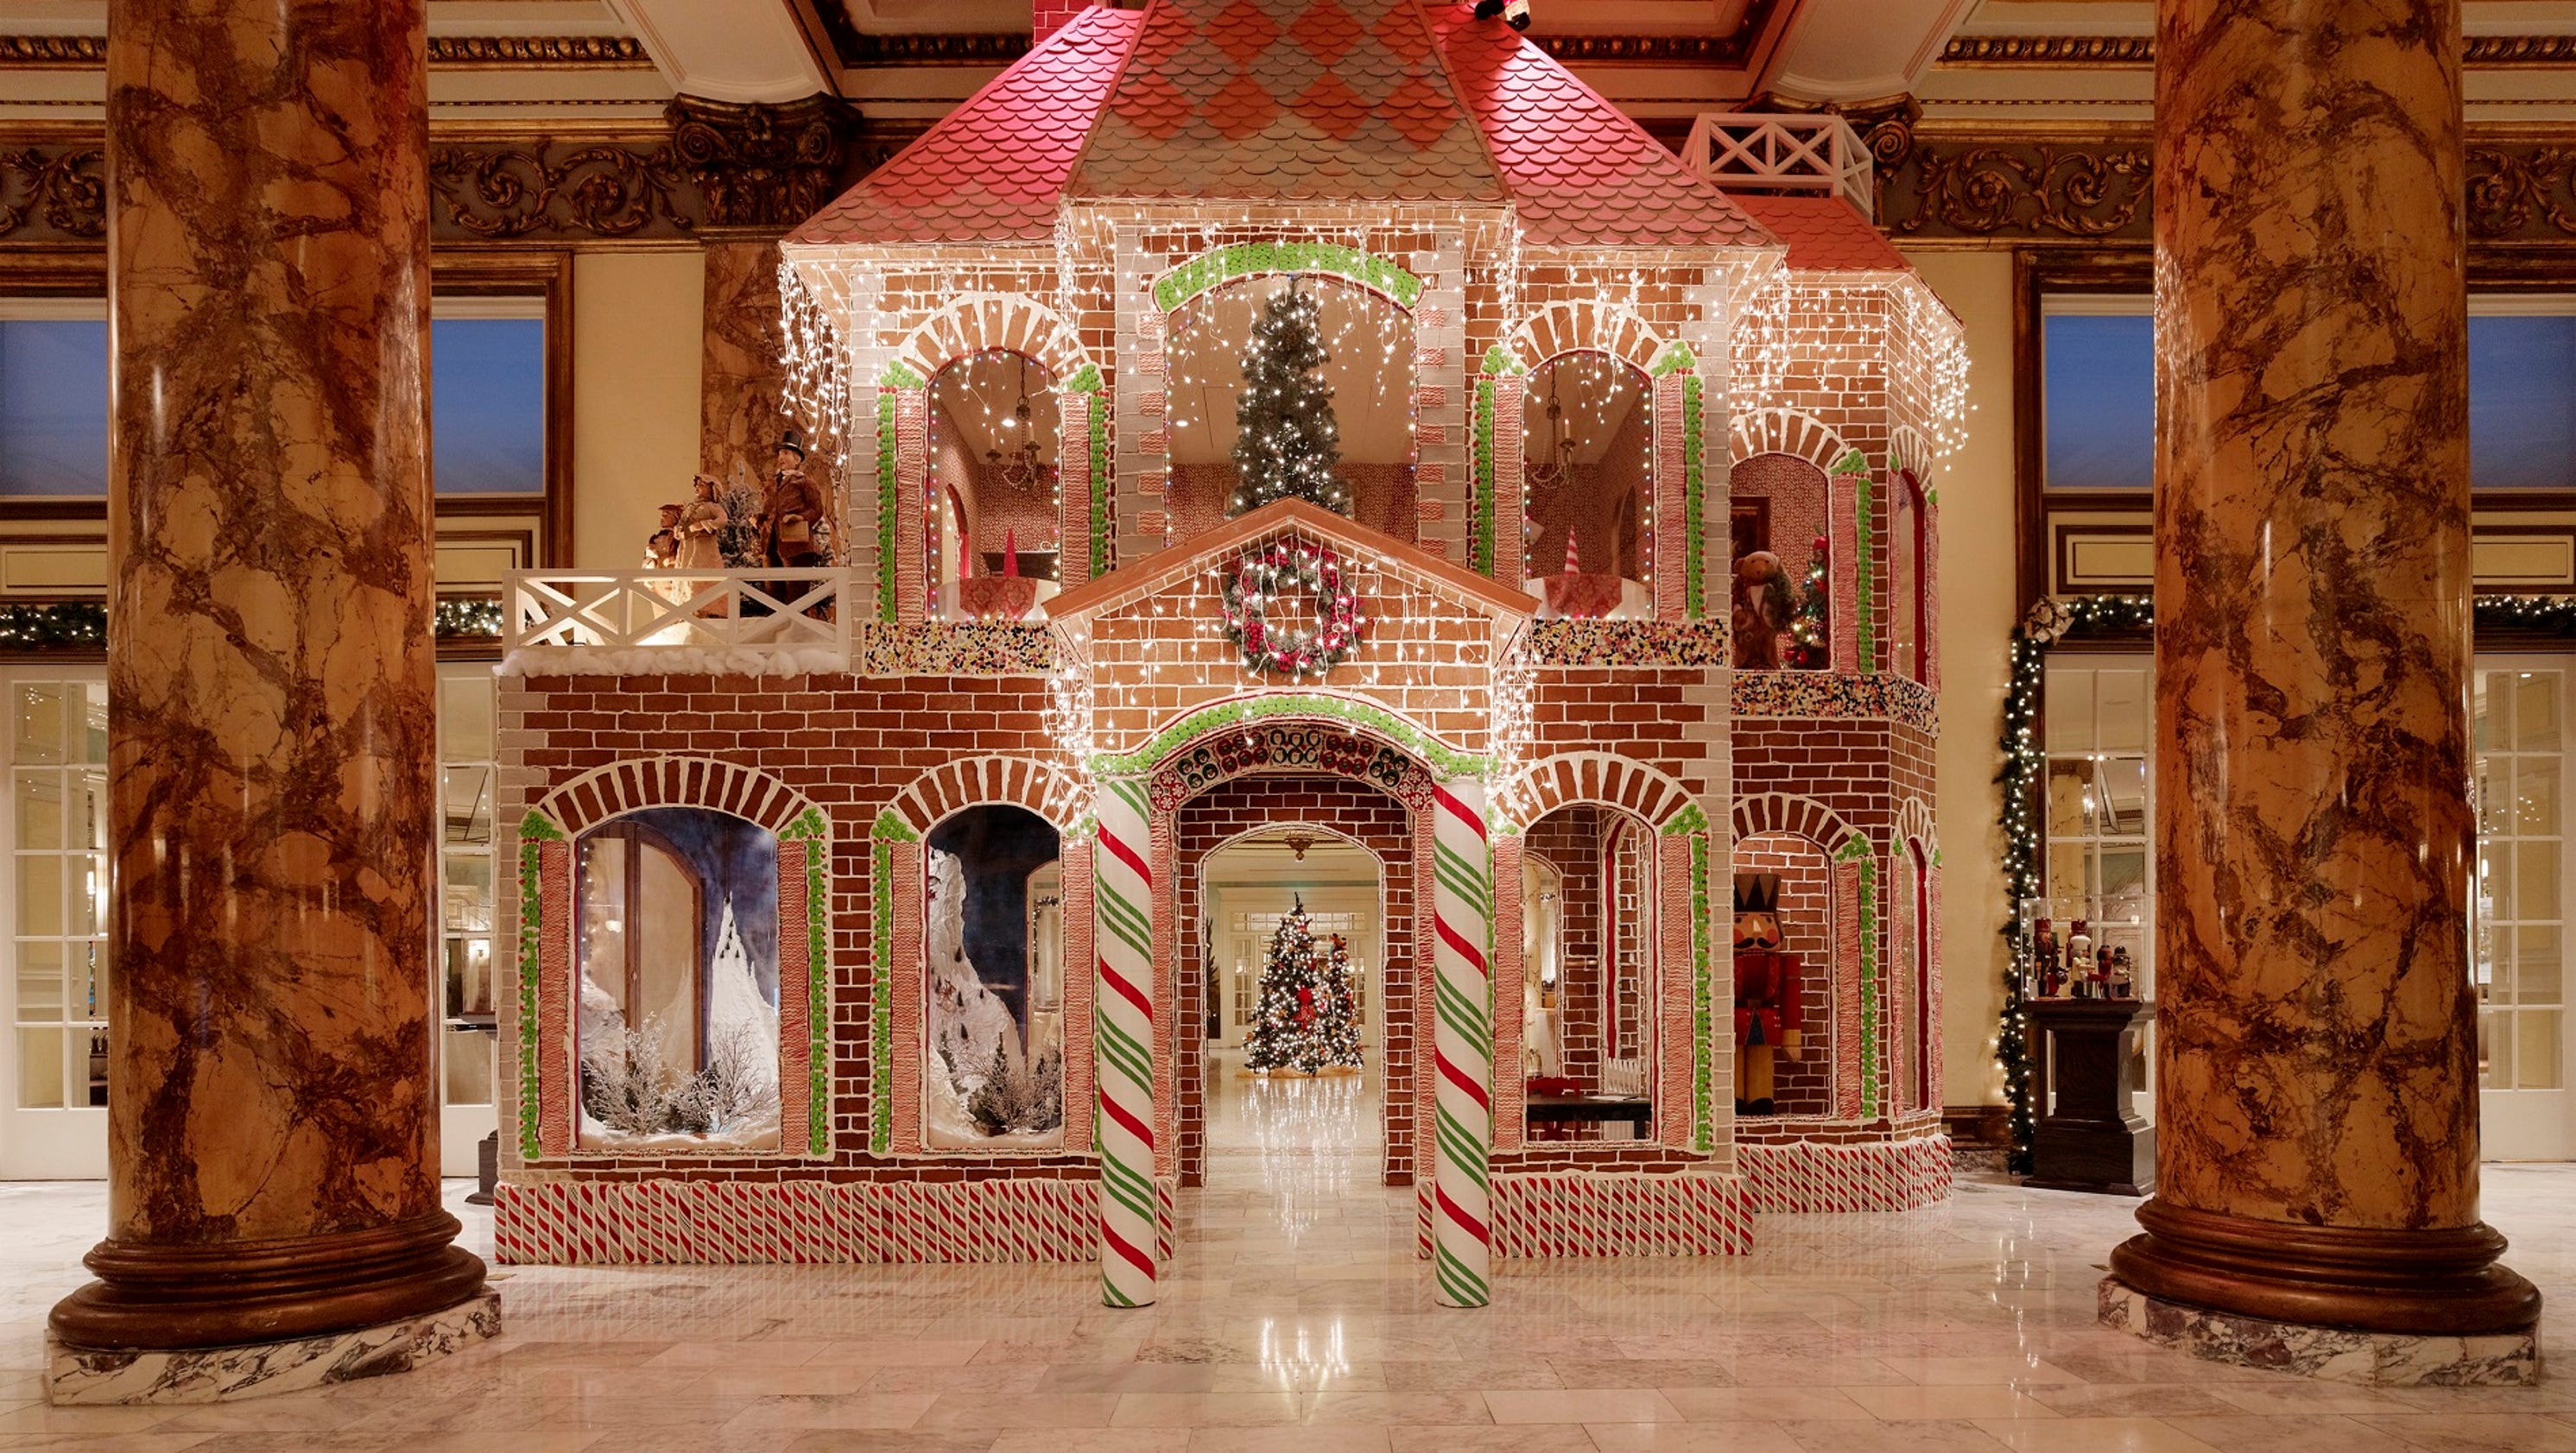 Amazing gingerbread house displays3200 x 1680